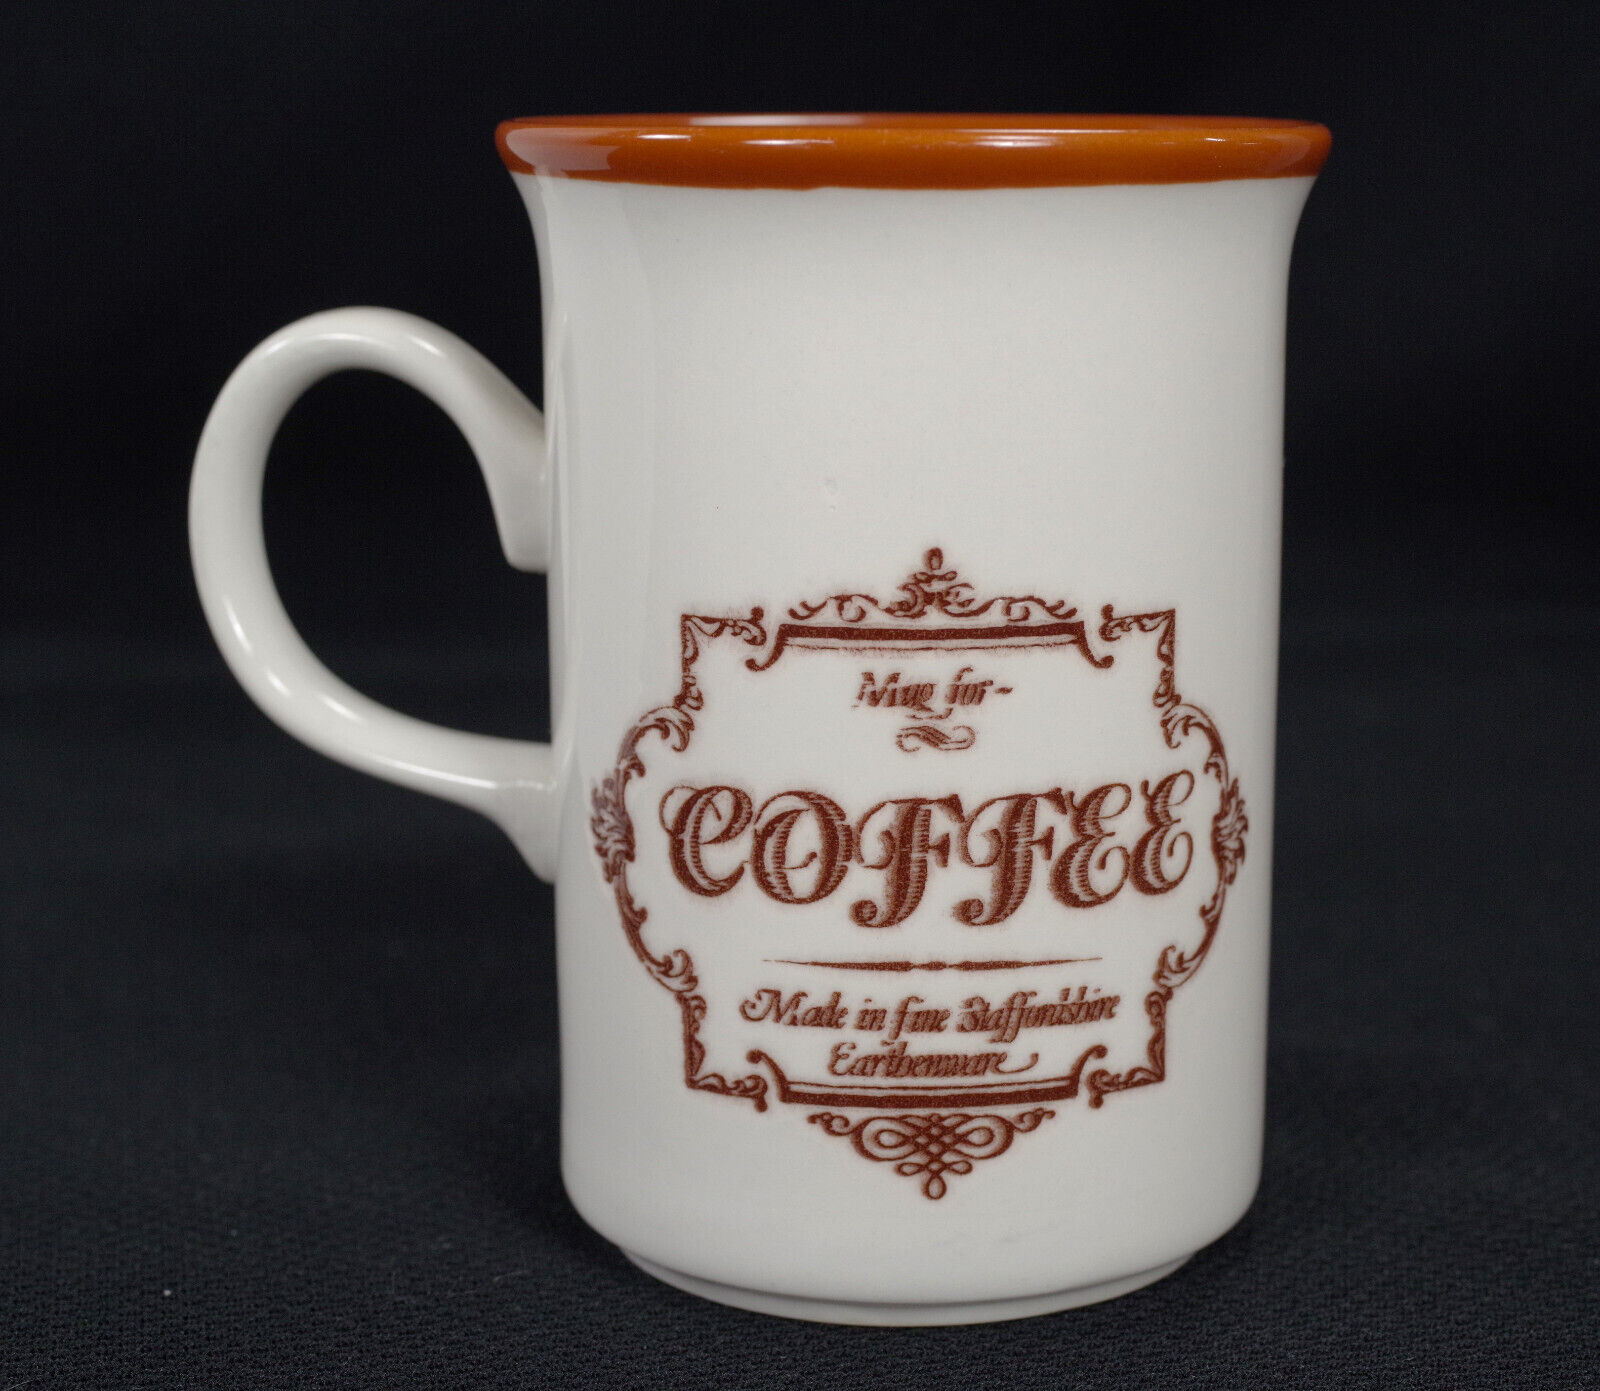 Vintage Churchill England Mug for Coffee Made in Fine Staffordshire Earthenware